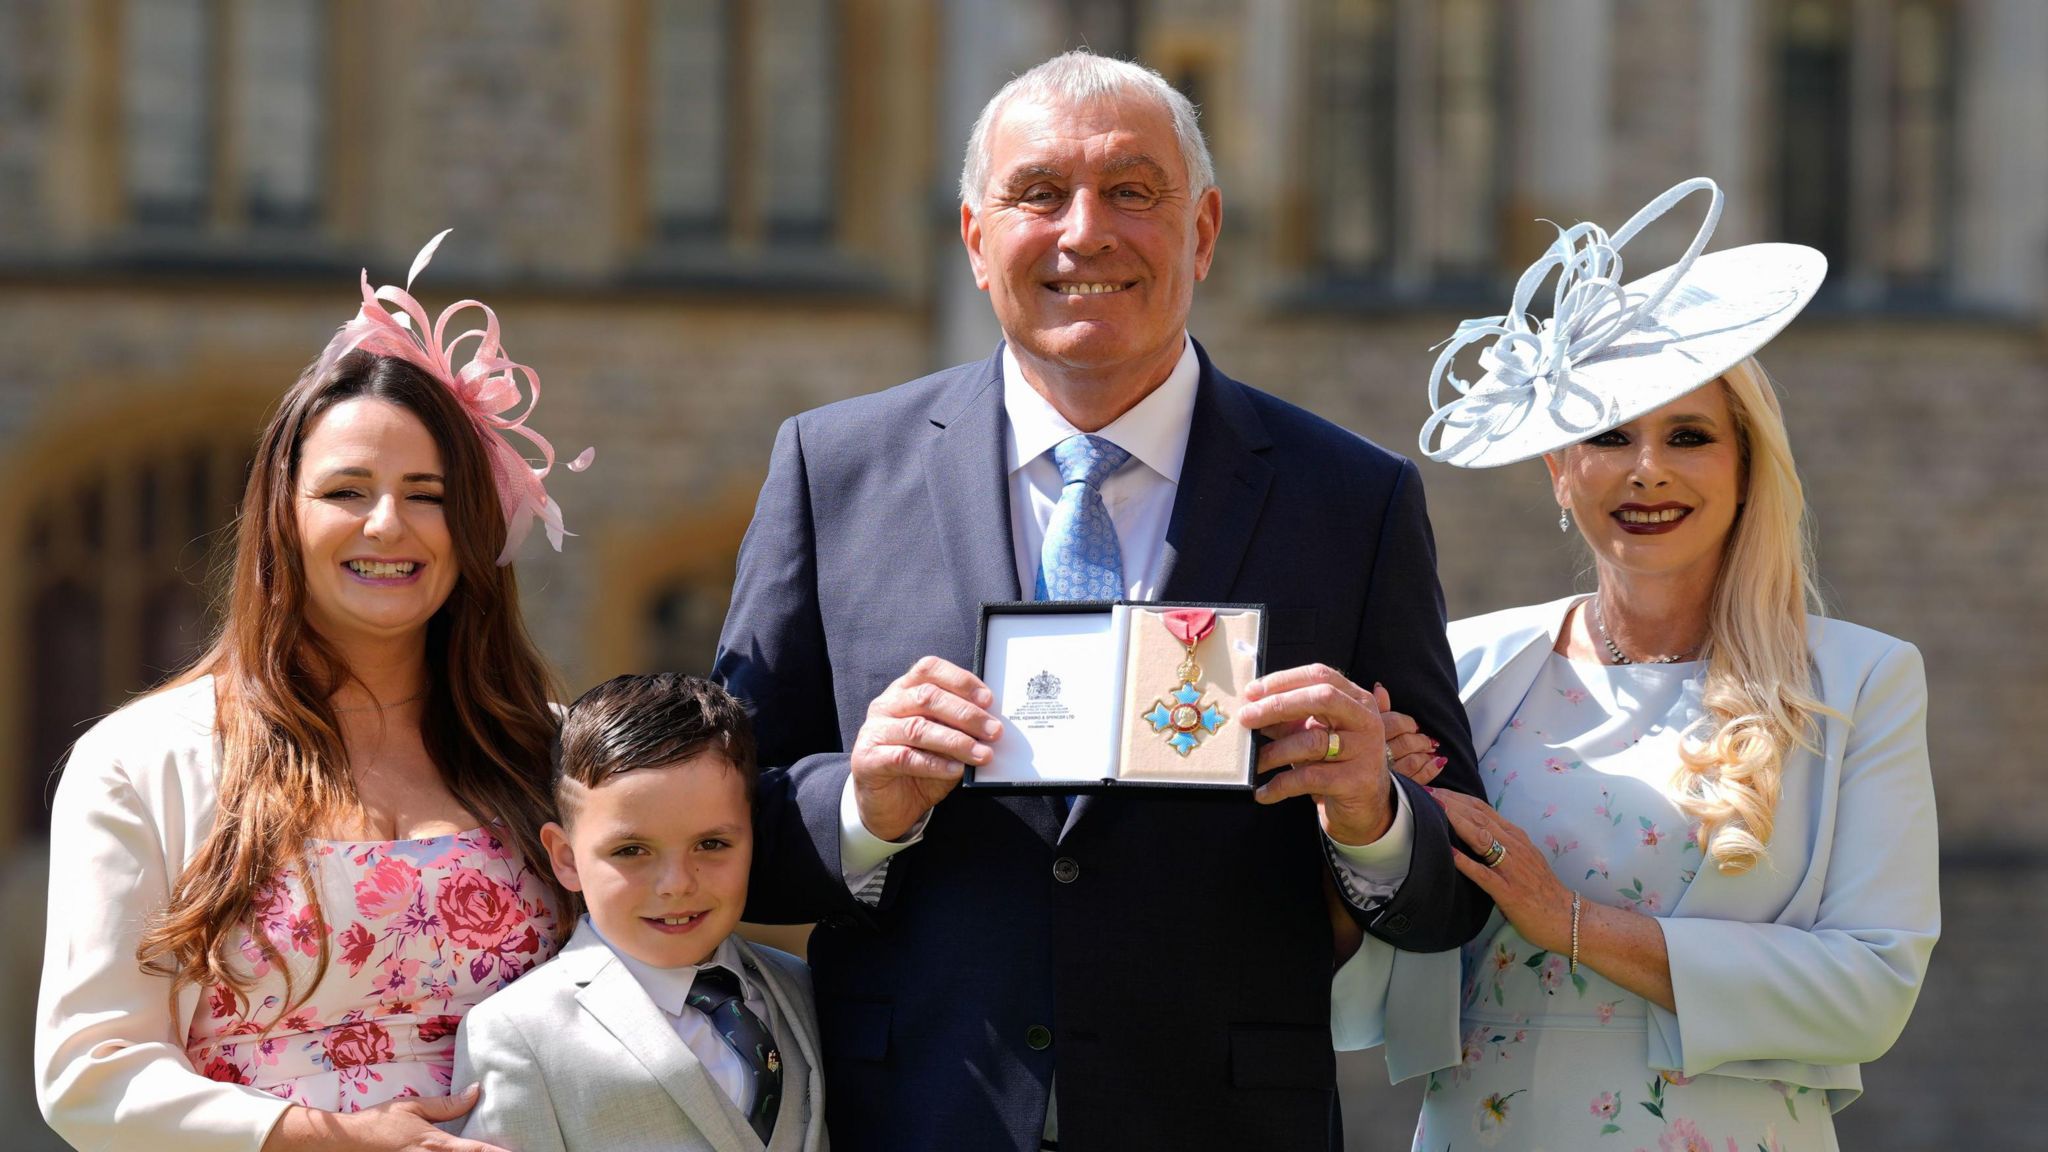 Peter Shilton with his wife Steph Shilton and son and daughter at Windsor Castle